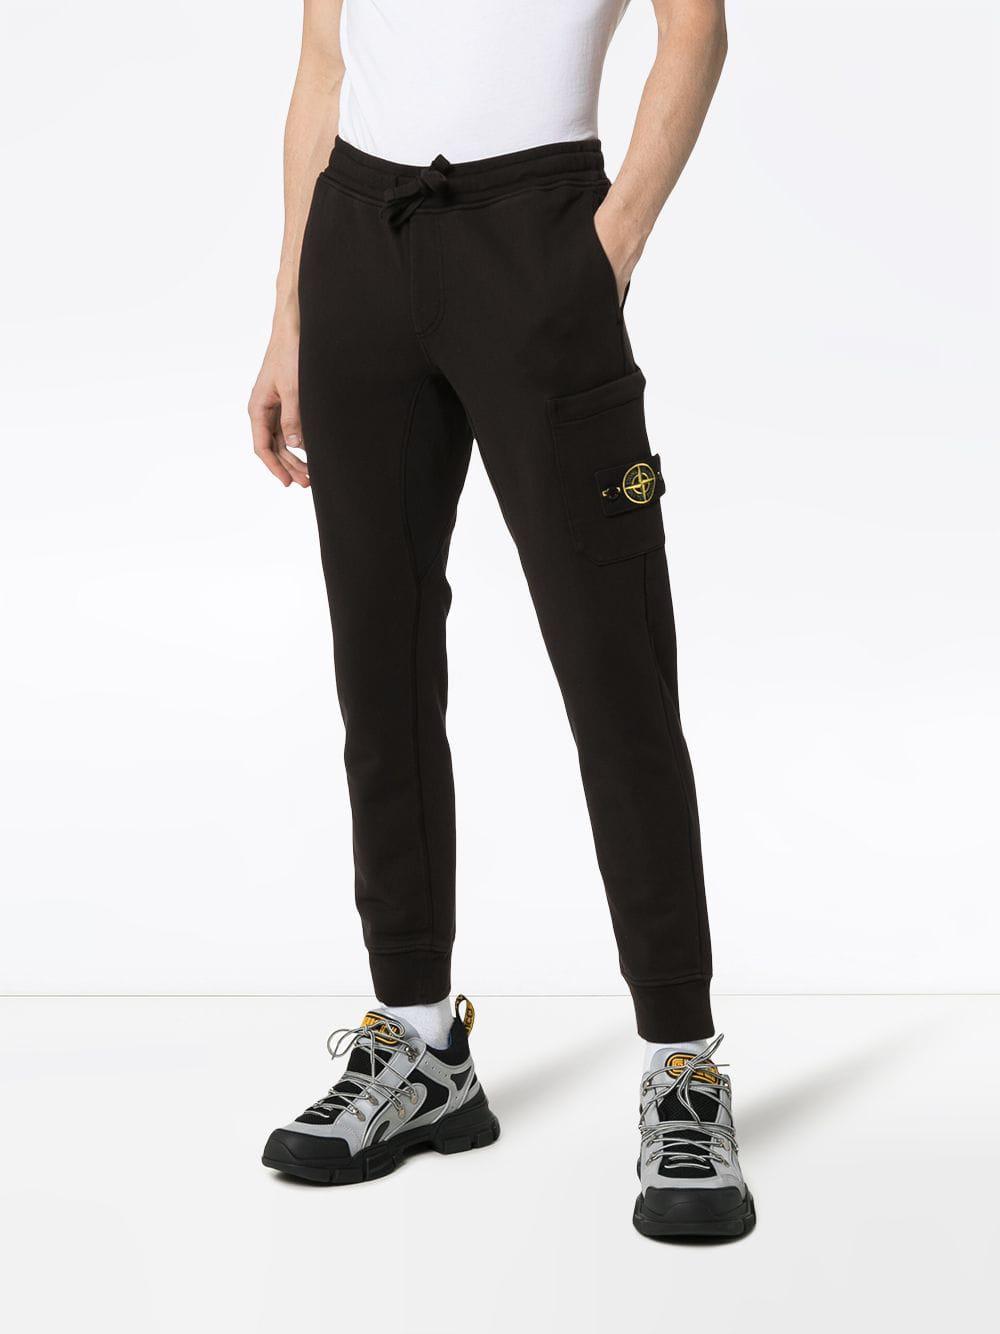 Stone Island Tapered Cotton Sweatpants in Black for Men - Lyst